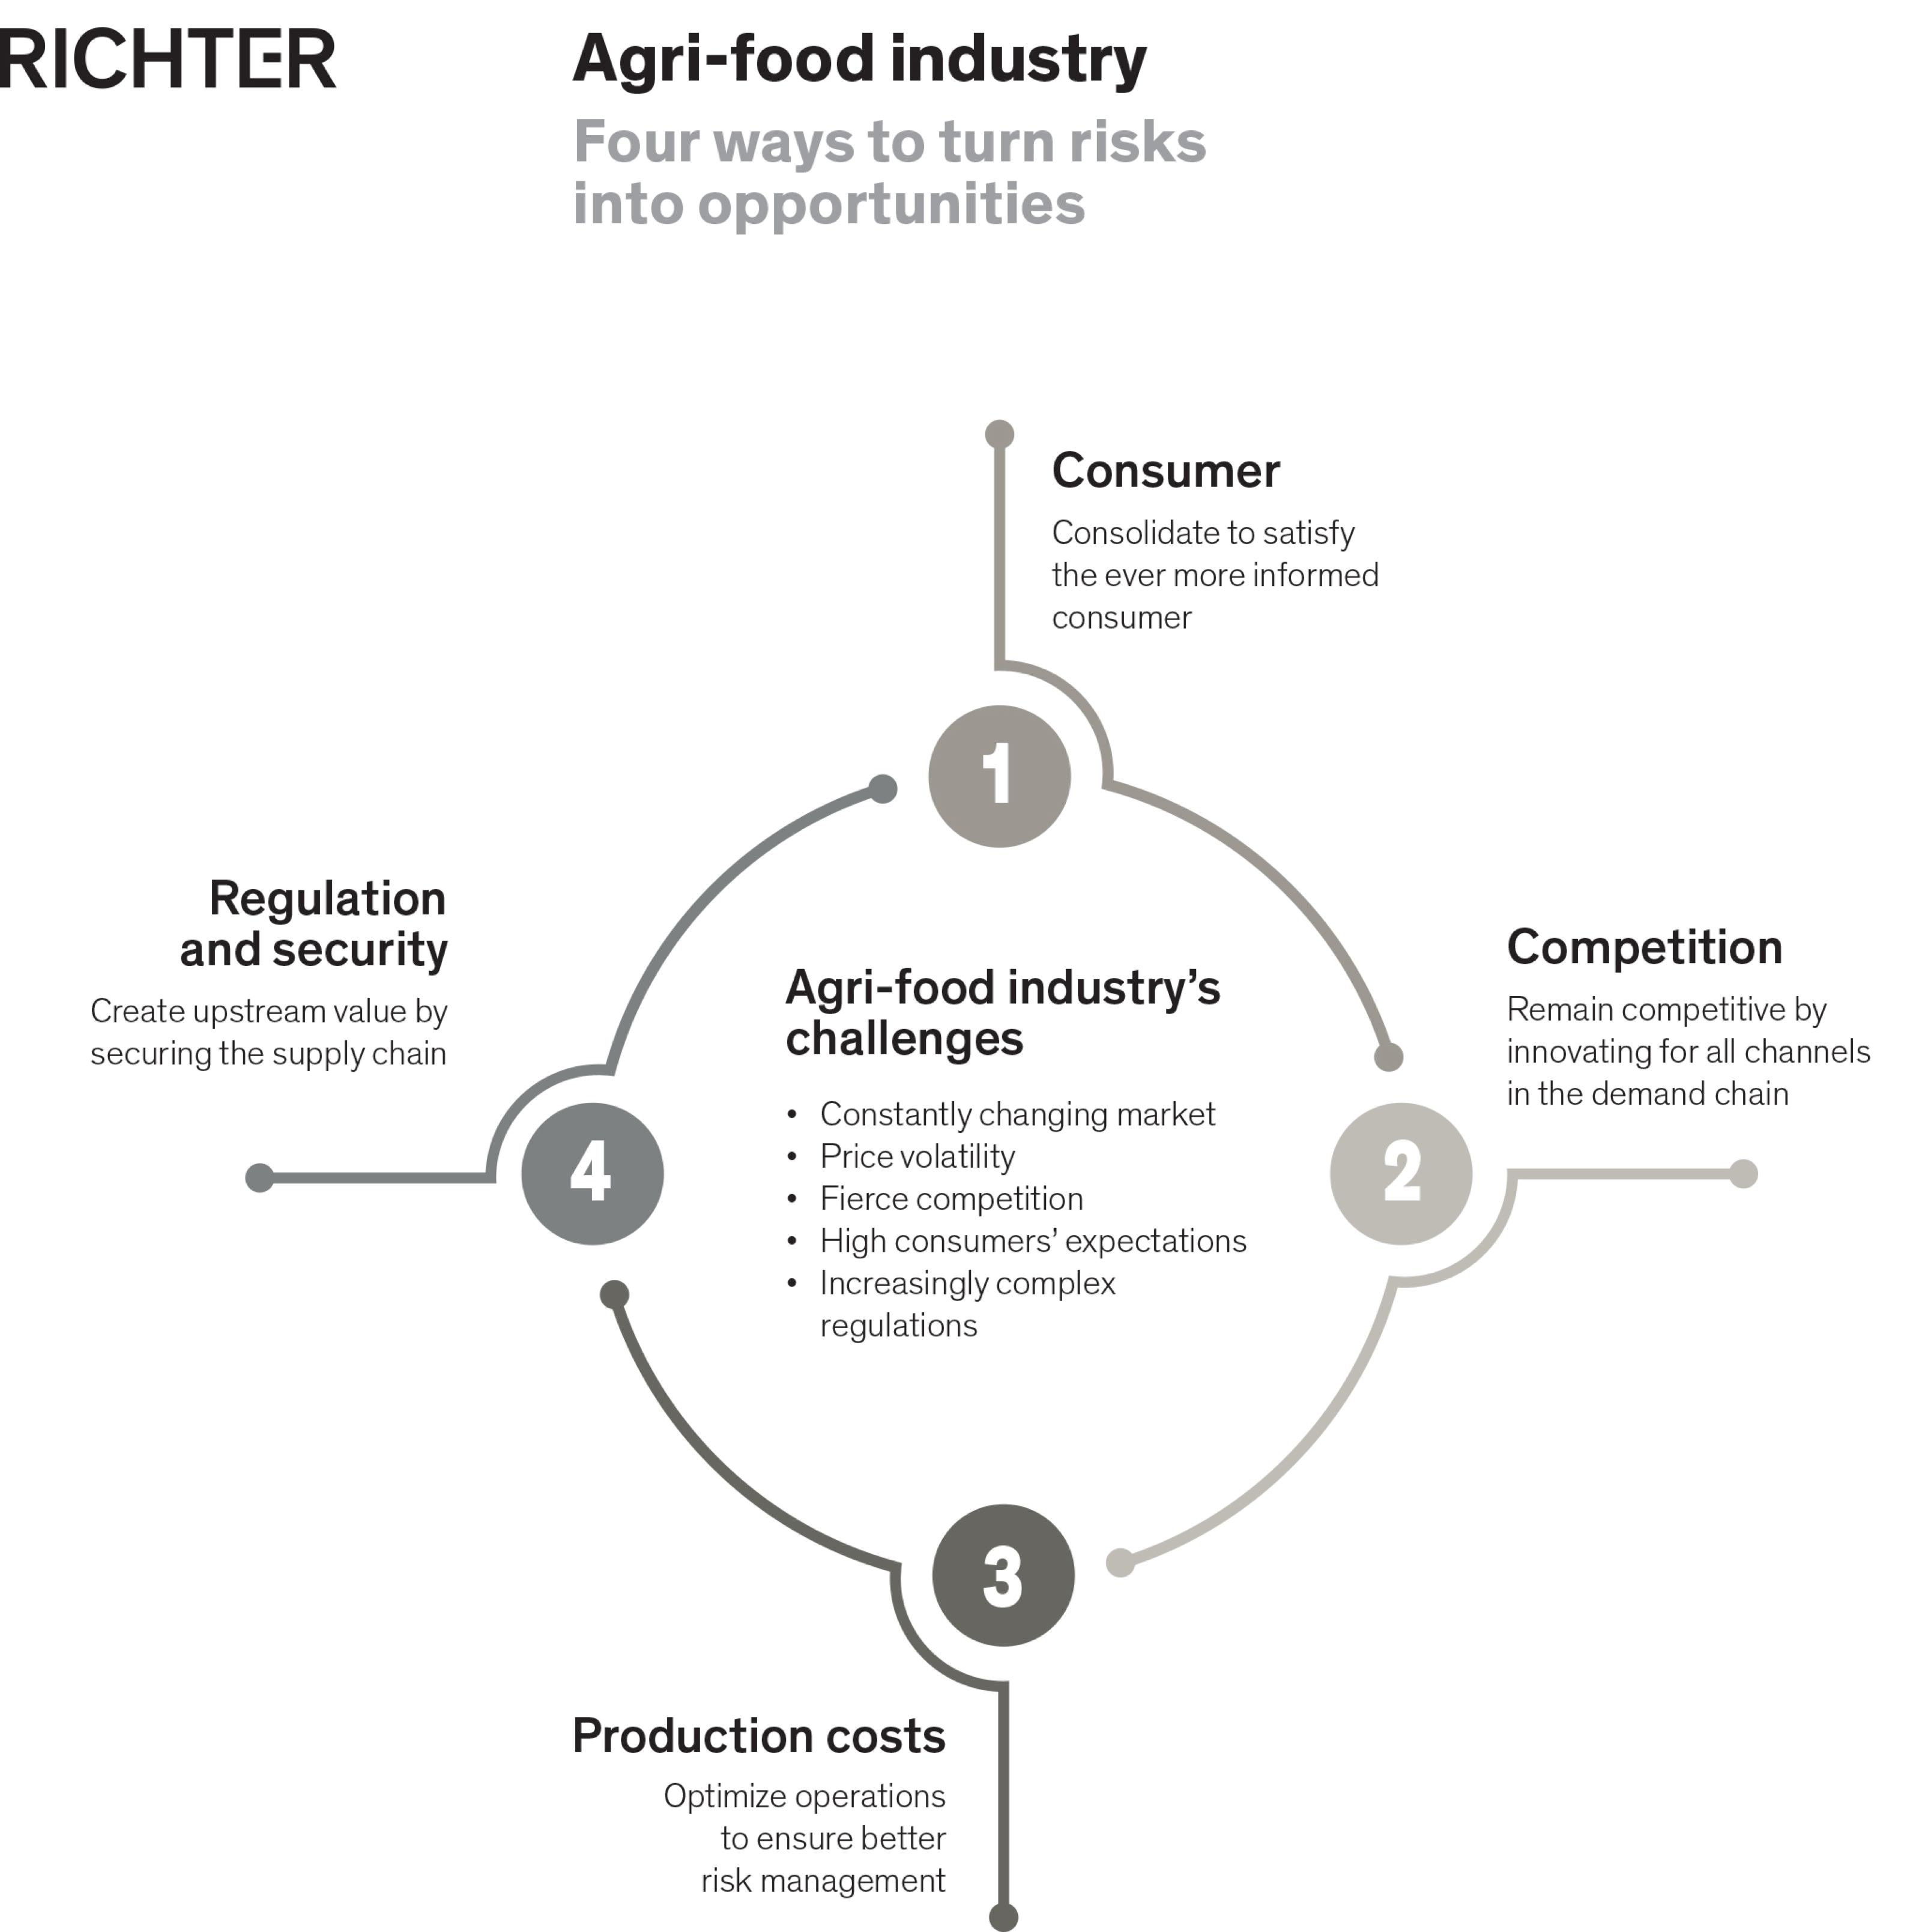 agri-food industry's challenges - consumer, competition, production costs, regulation and security - graph 